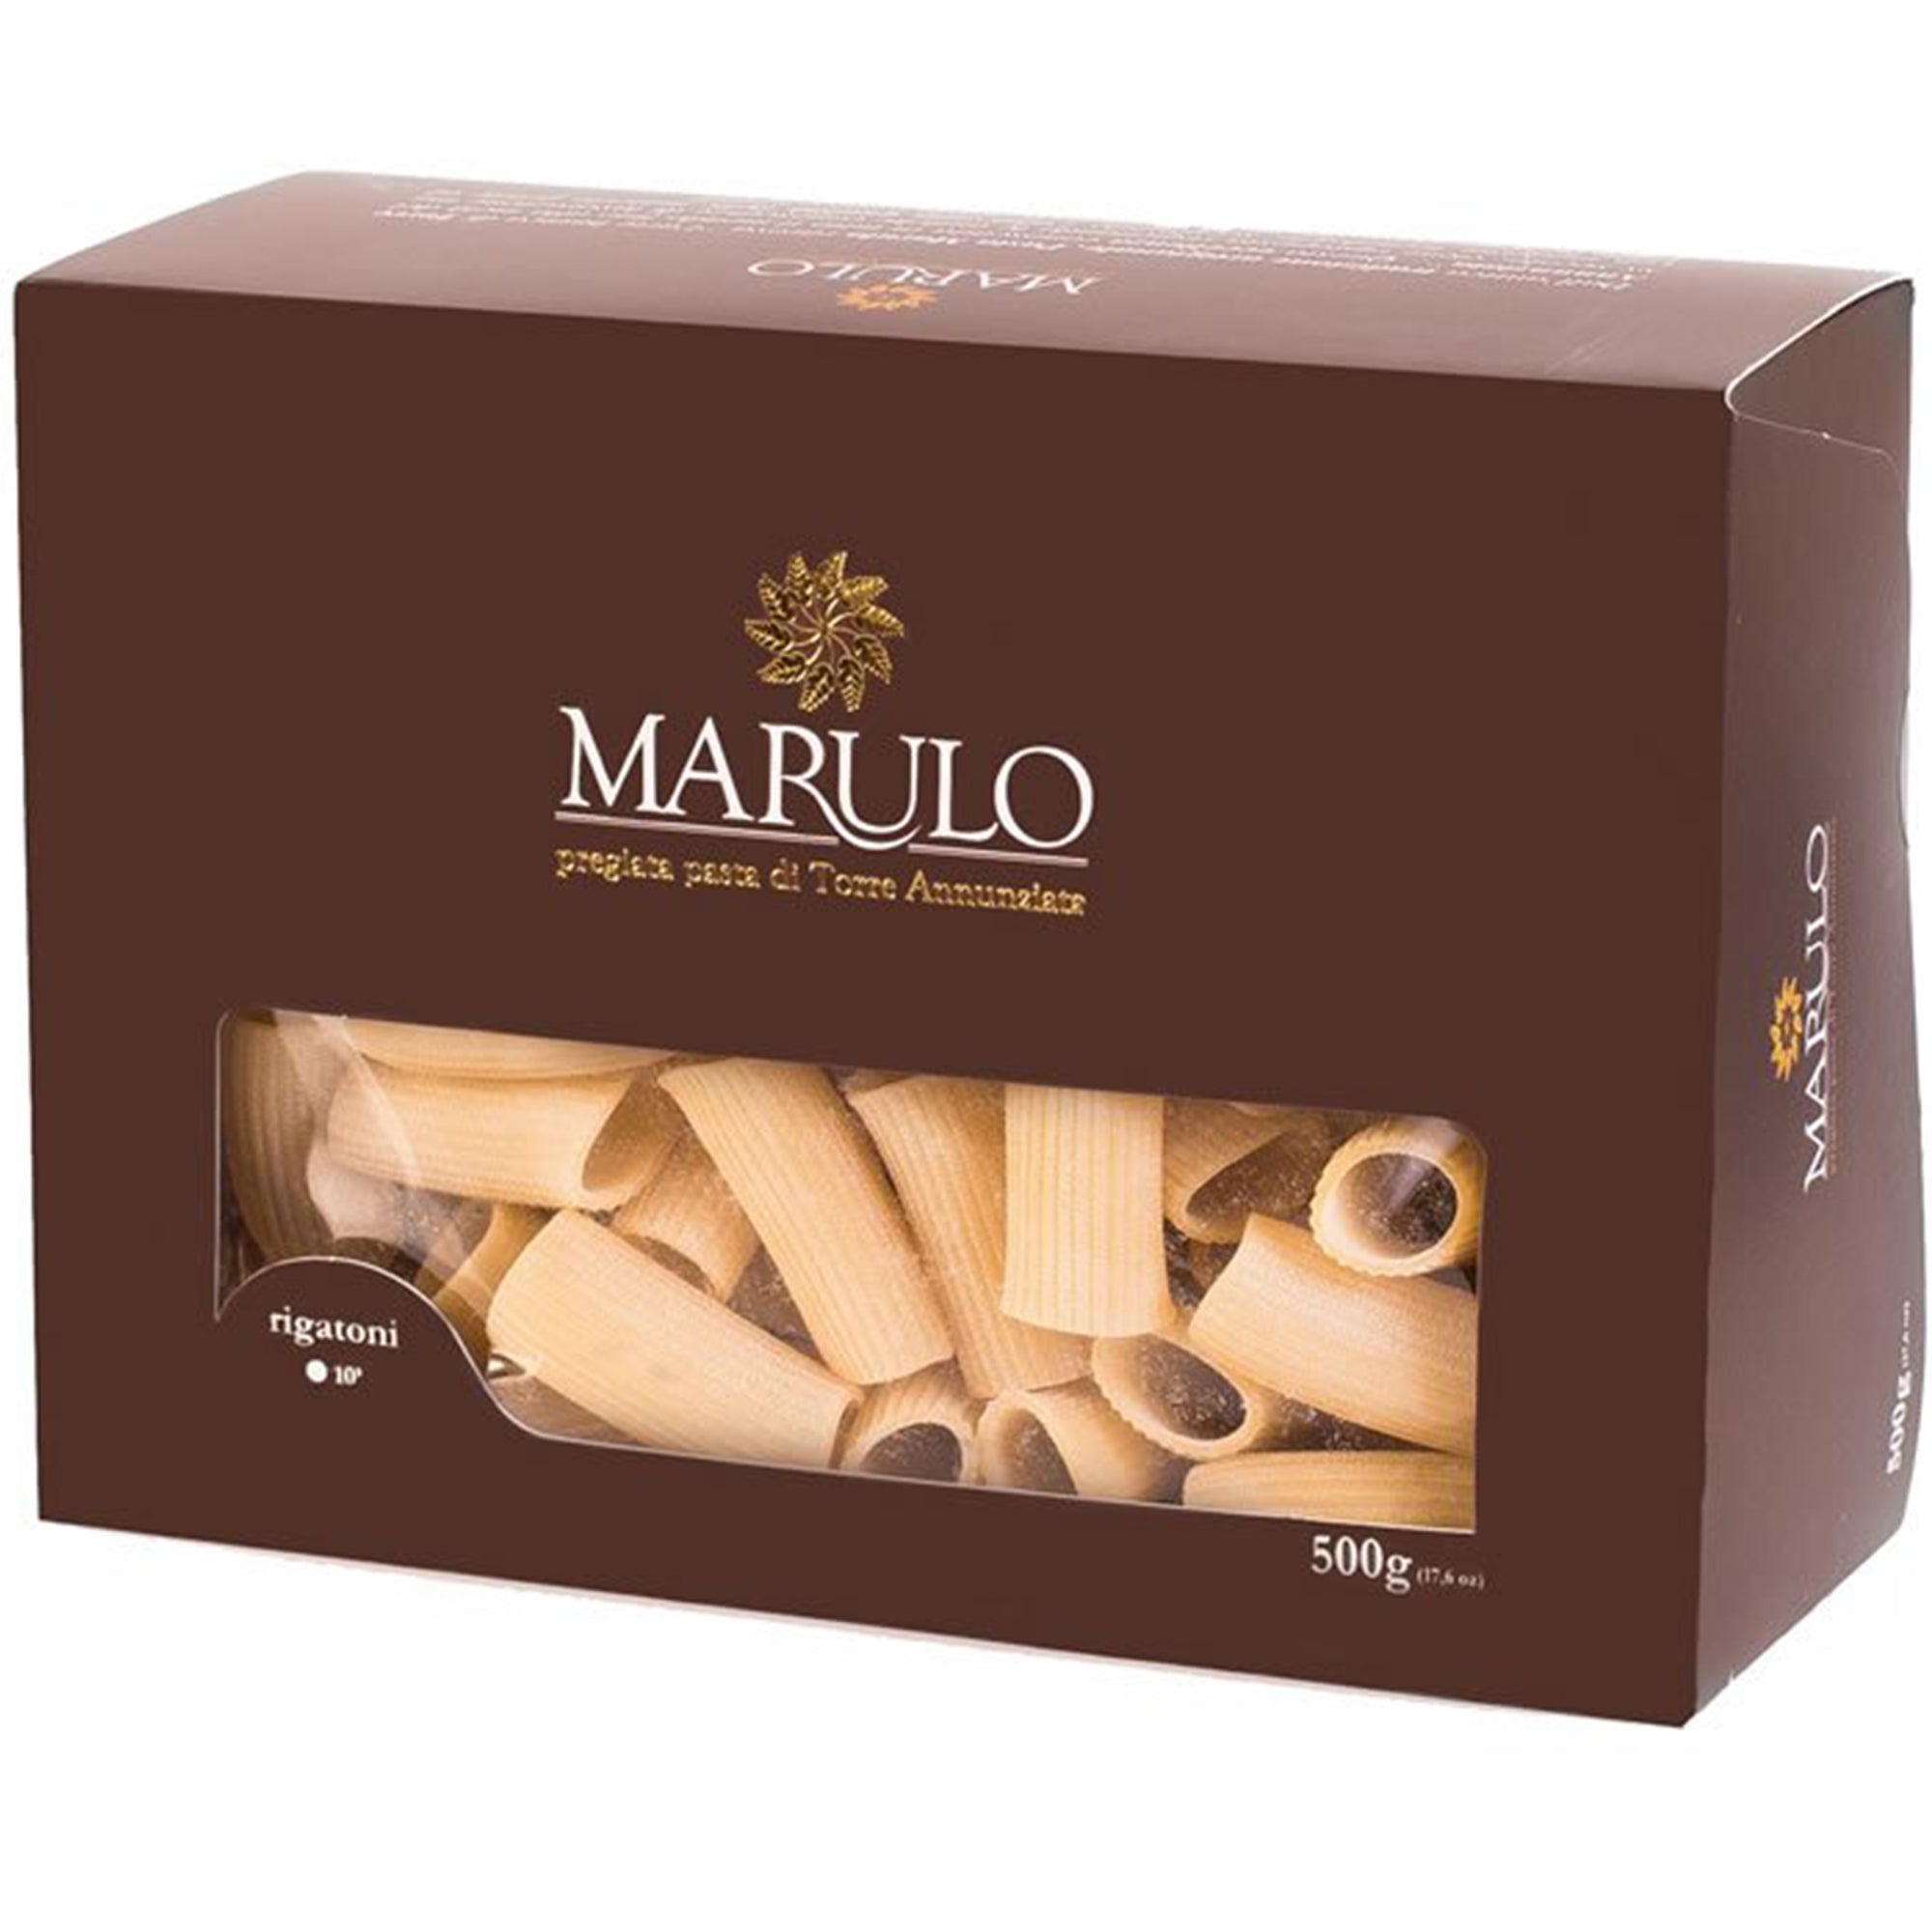 WholesaleItalianFood.com is pleased to offer  authentic Marulo Artisan Pasta made from the finest, high-quality ingredients at an affordable price. We are passionate and dedicated to our products, the environment, and providing a fantastic variety of pasta like our delicious Marulo Artisan Pasta.